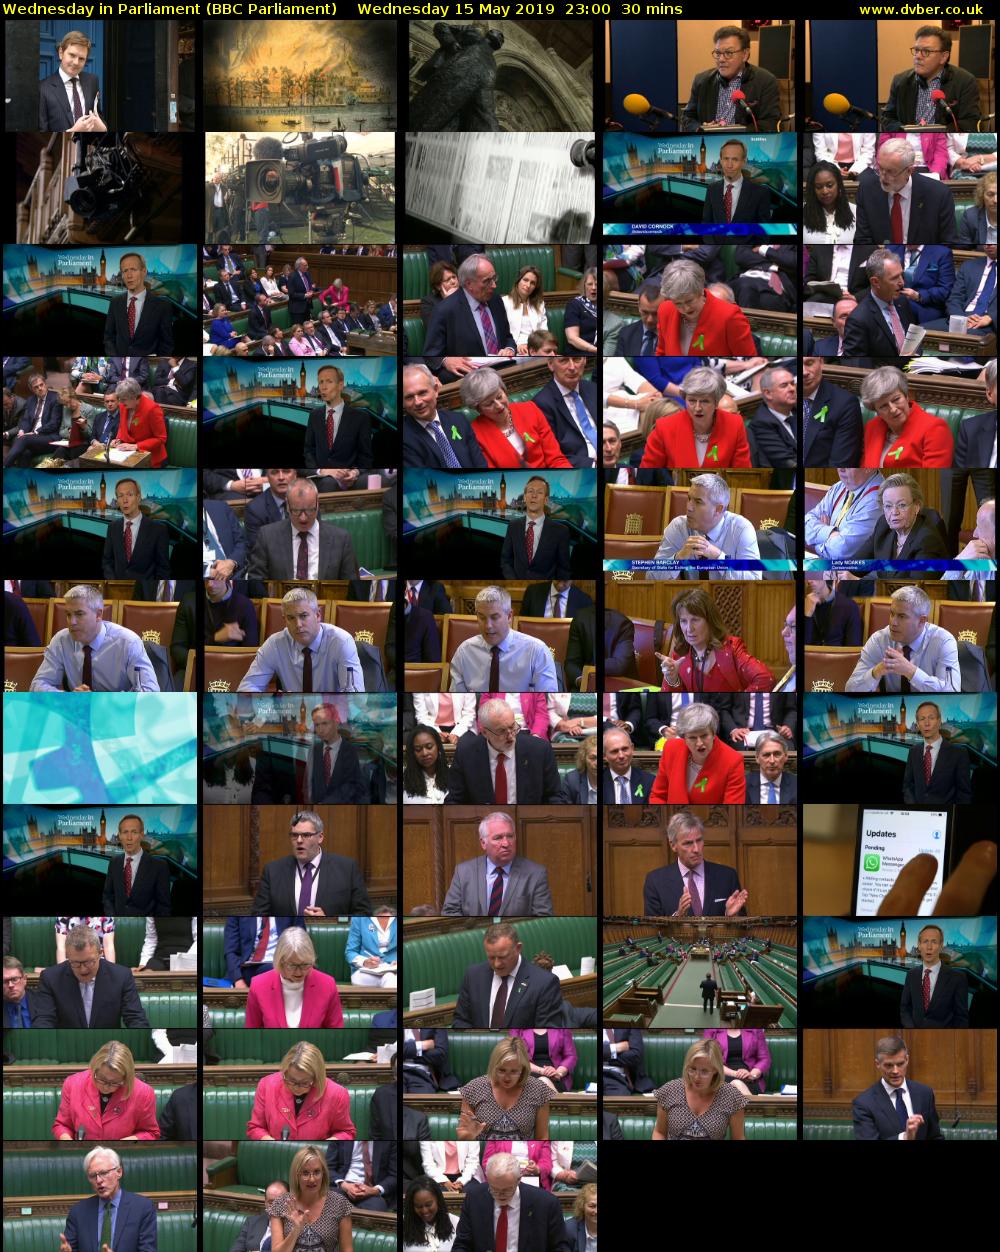 Wednesday in Parliament (BBC Parliament) Wednesday 15 May 2019 23:00 - 23:30